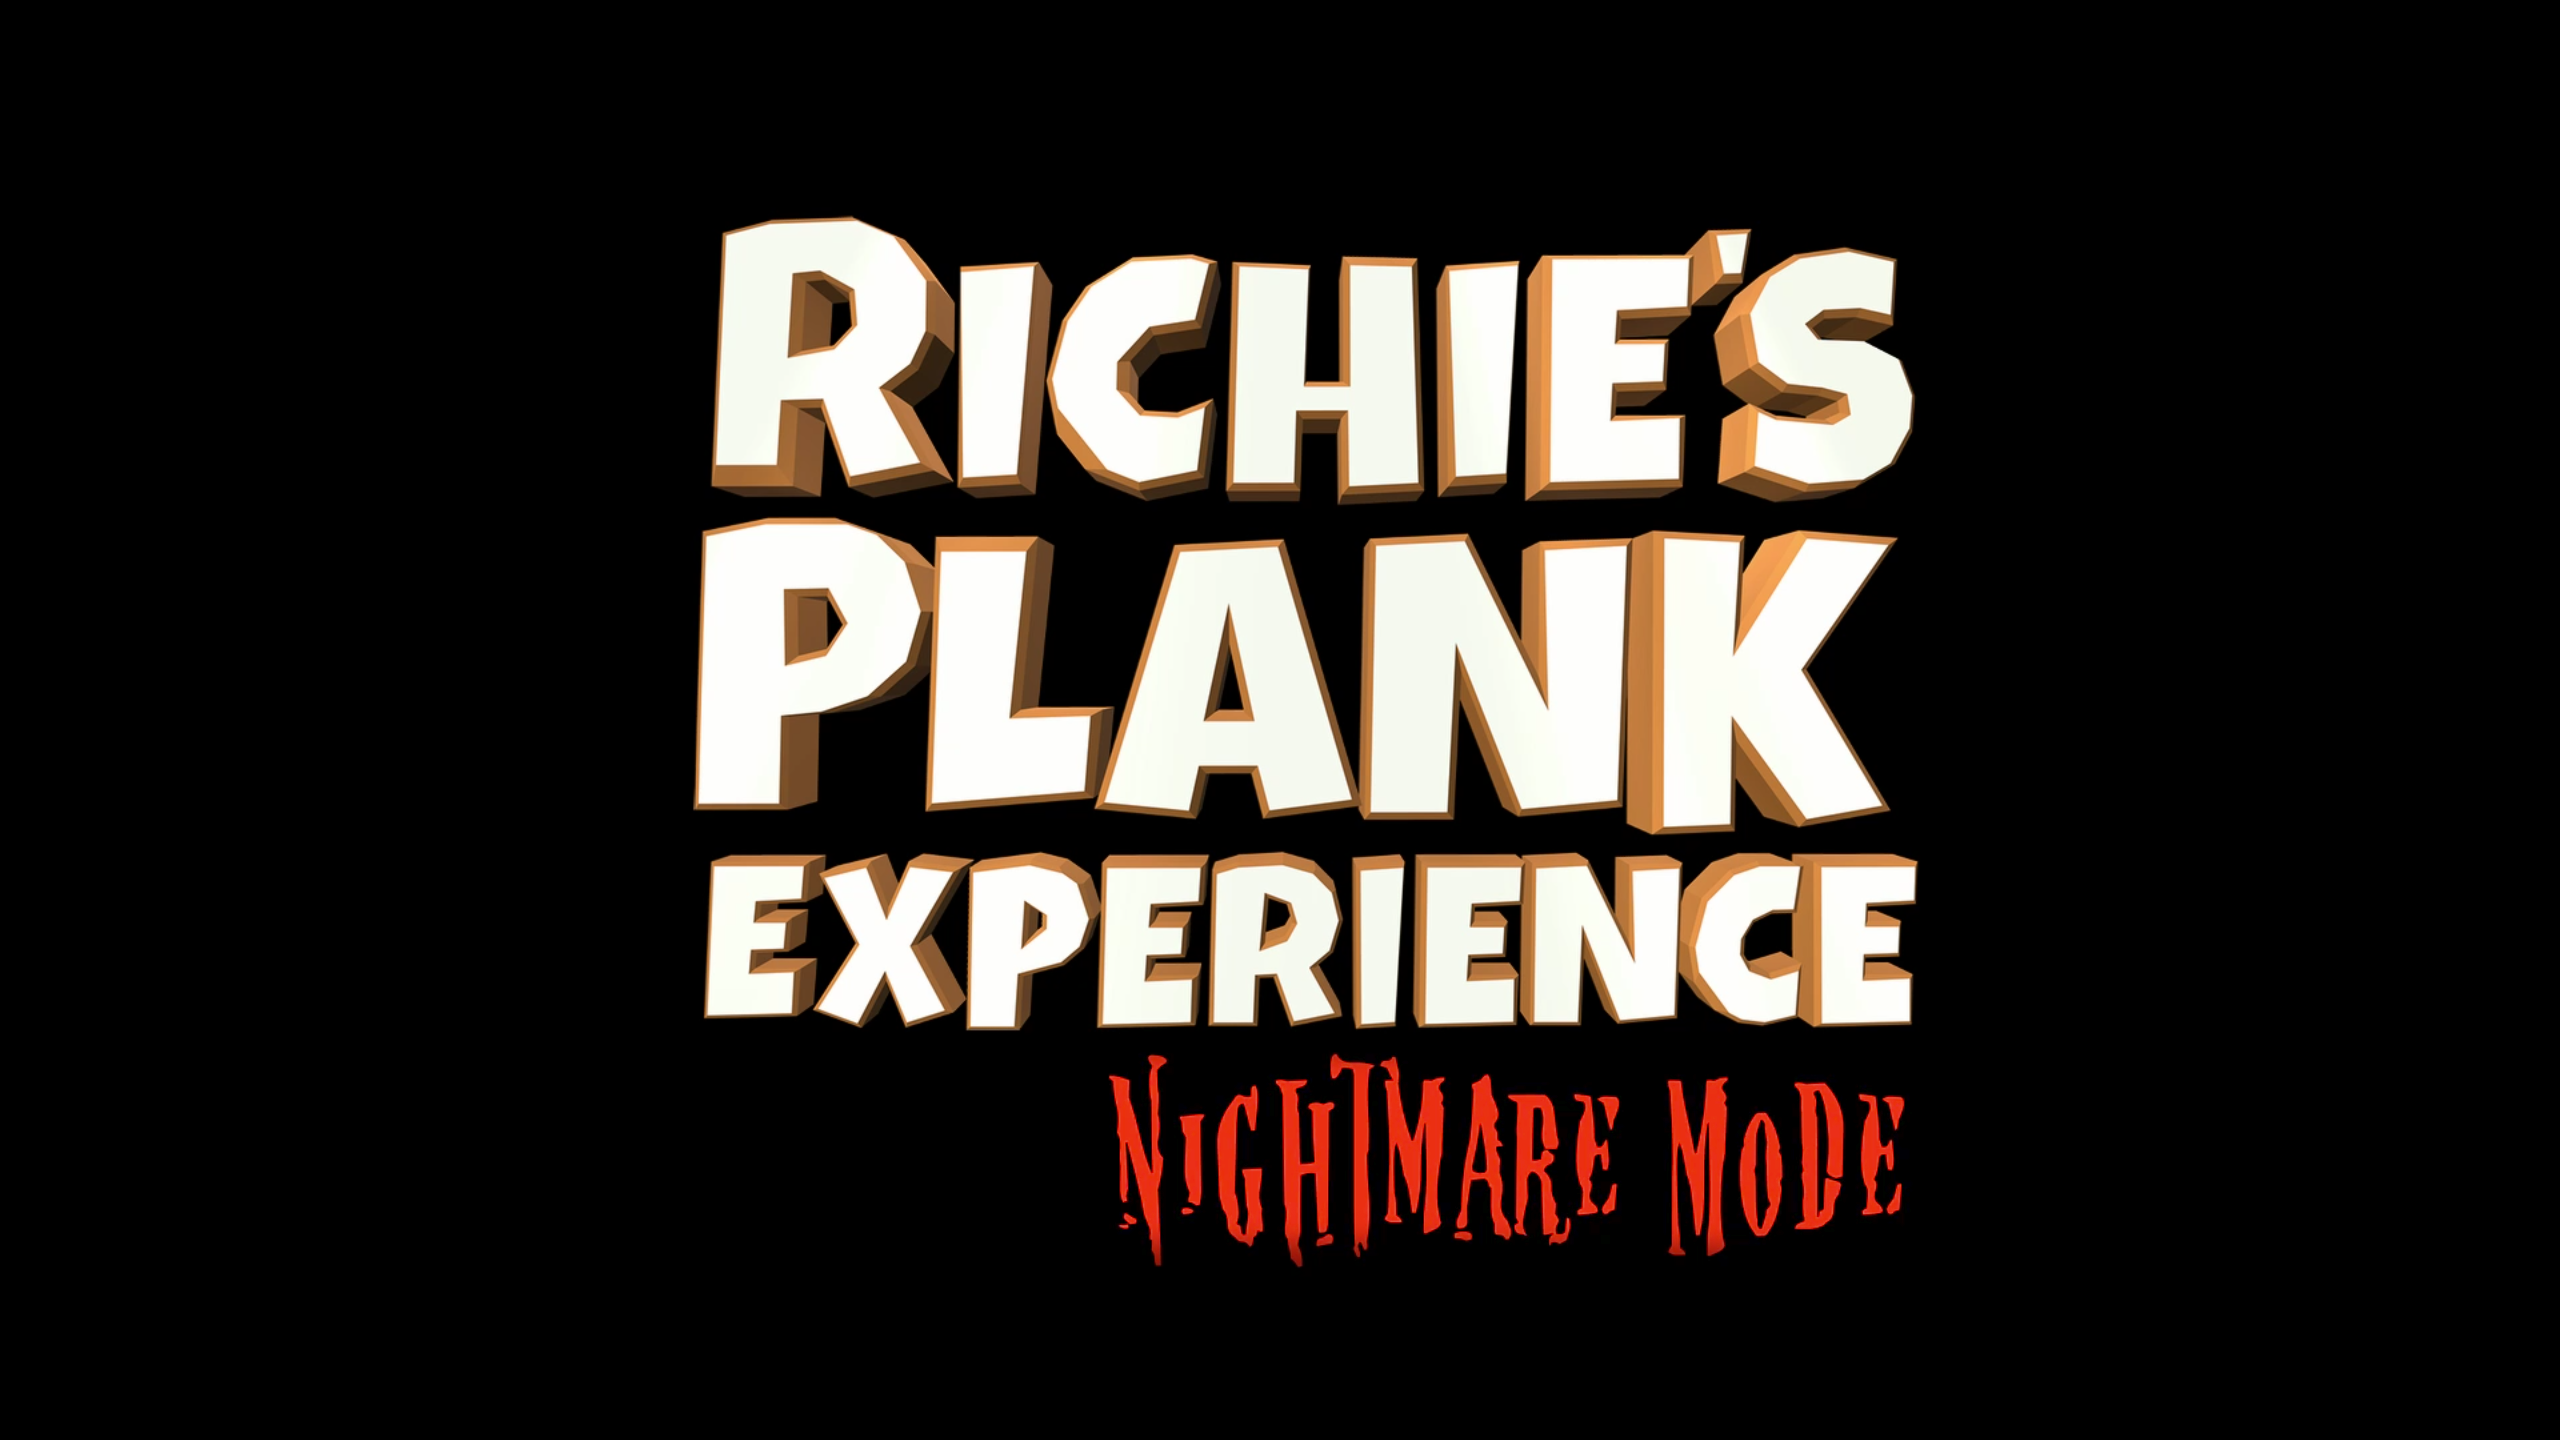 Plank experience. Richie's Plank. Richie's Plank experience. Plank experience VR. Richie Plank experience.